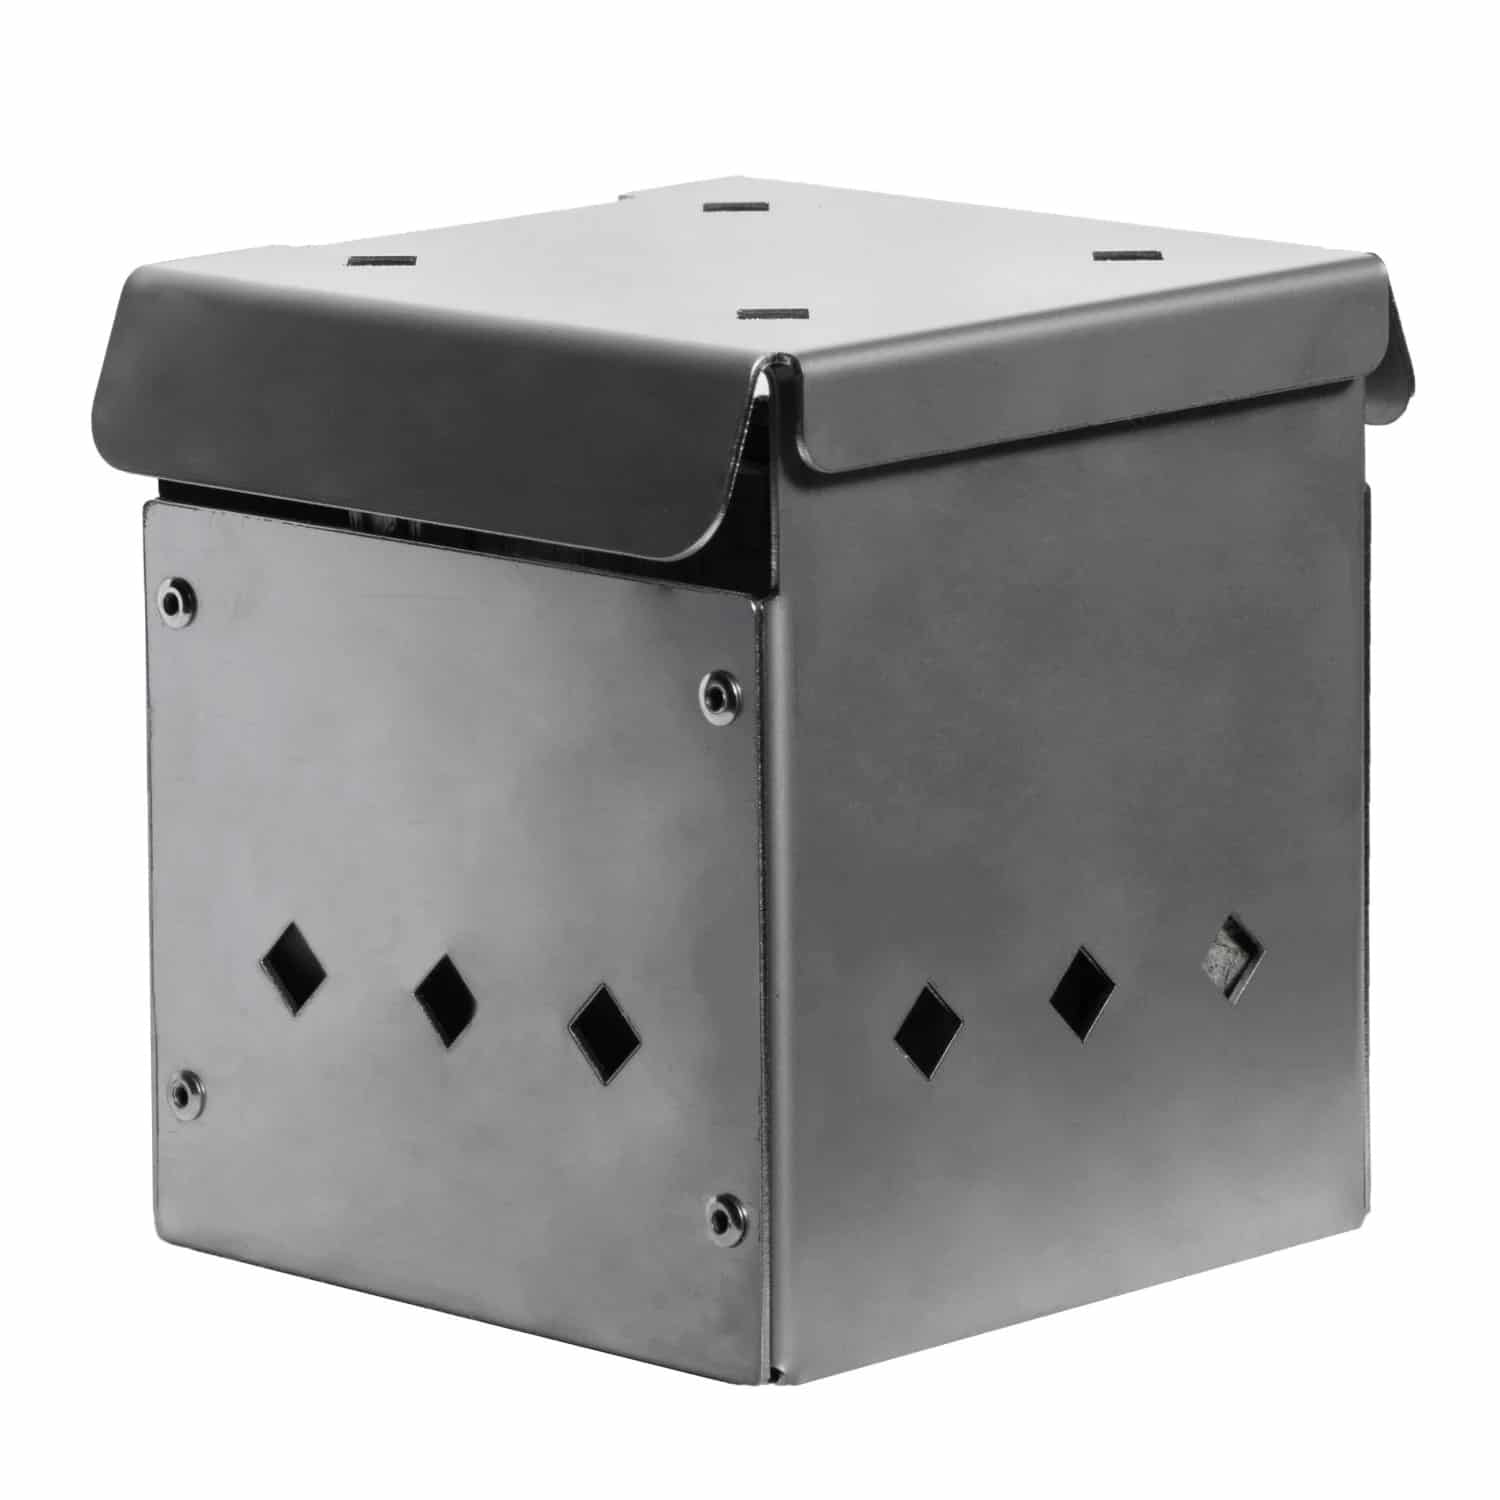 DKS Smoker Cooker Box for Grill